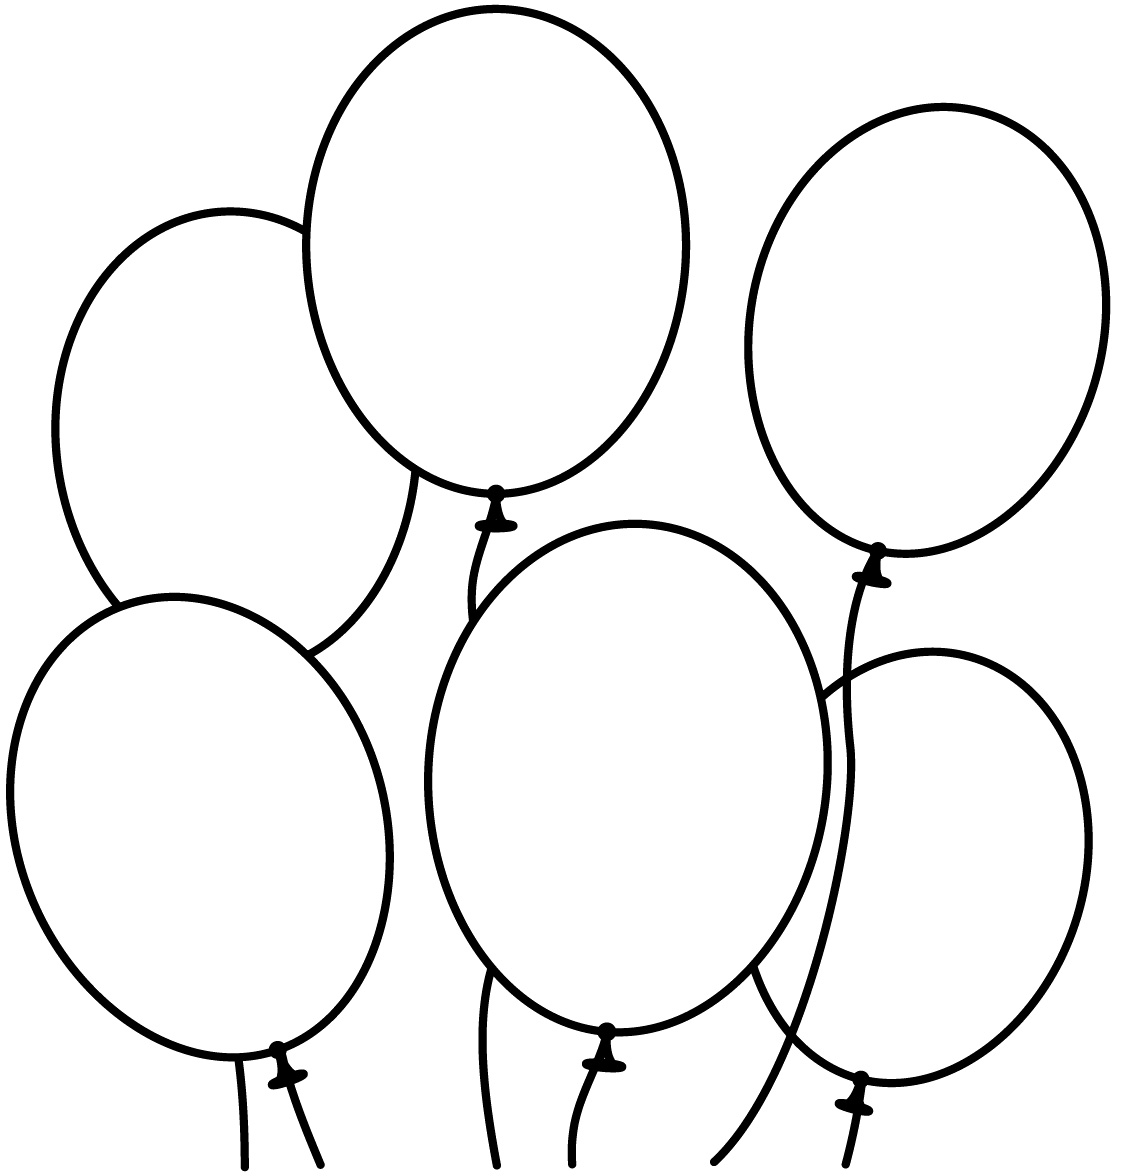 Free Printable Balloons - ClipArt Best